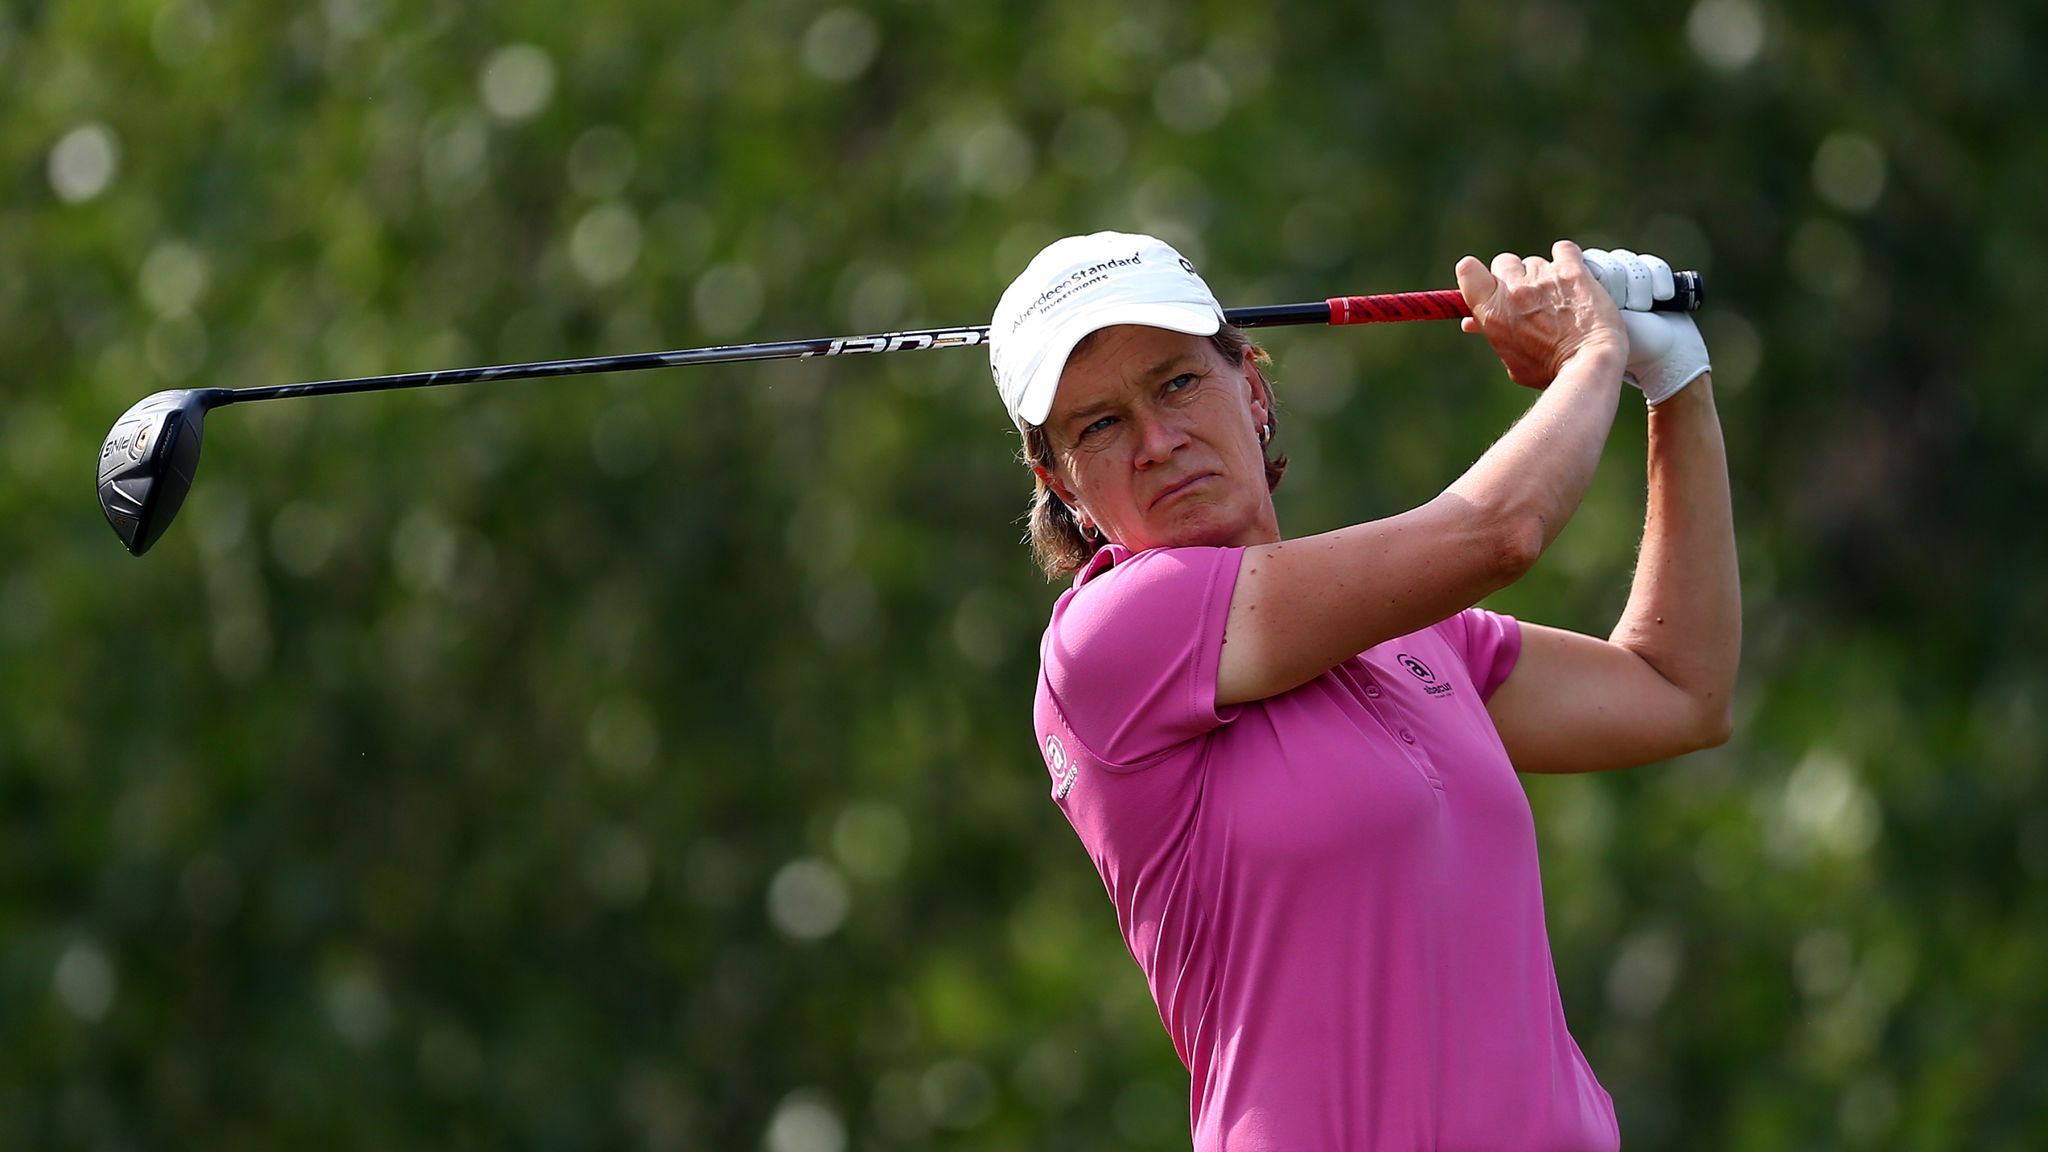 Catriona Matthew to play final LPGA event in July | Football News | Sky ...